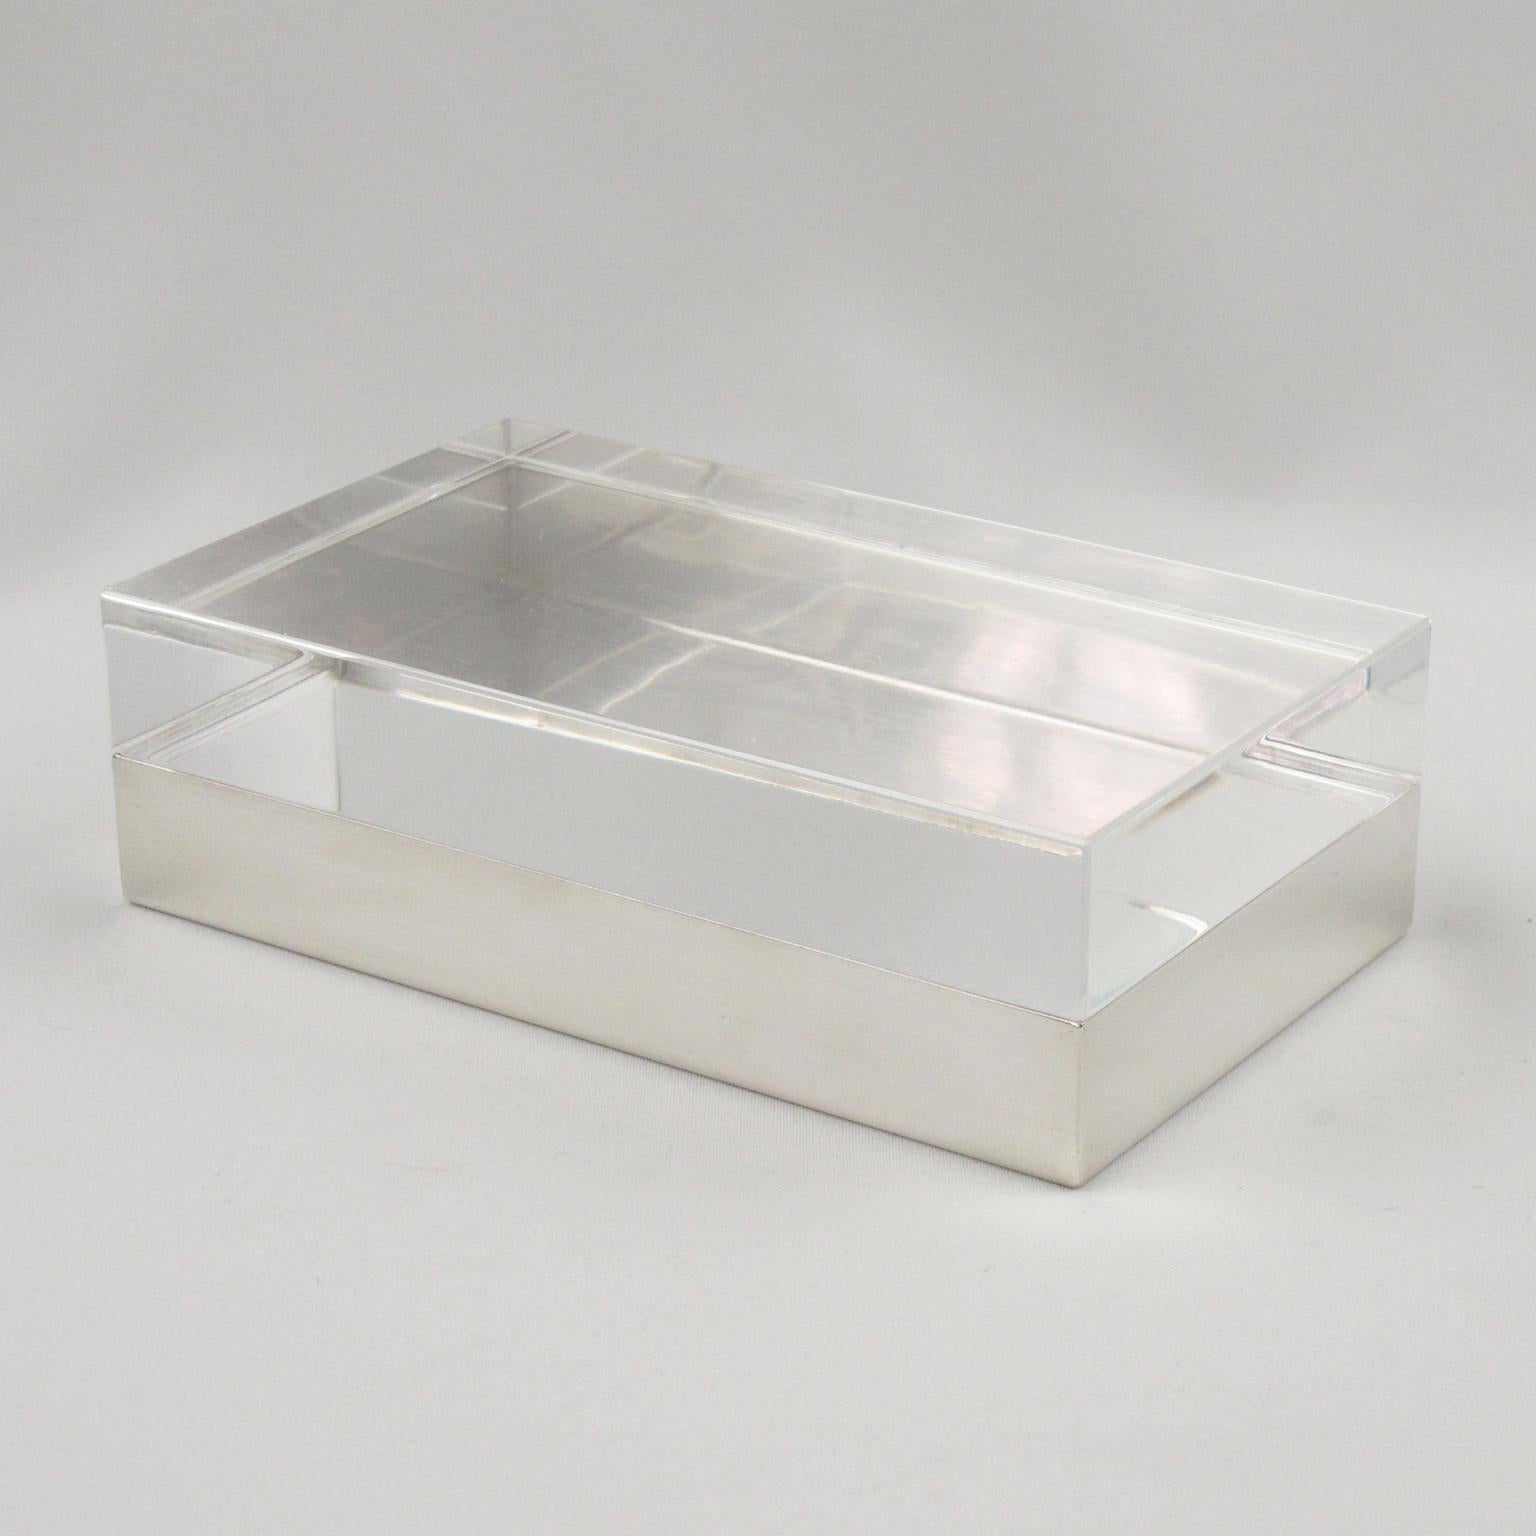 Elegant 1970s modernist decorative box designed by Christofle France. Geometric shape with silver plate base and thick crystal clear Lucite lid. Marked on side: Christofle France with legal hallmarks.
(This sale is for one single box).
Please note